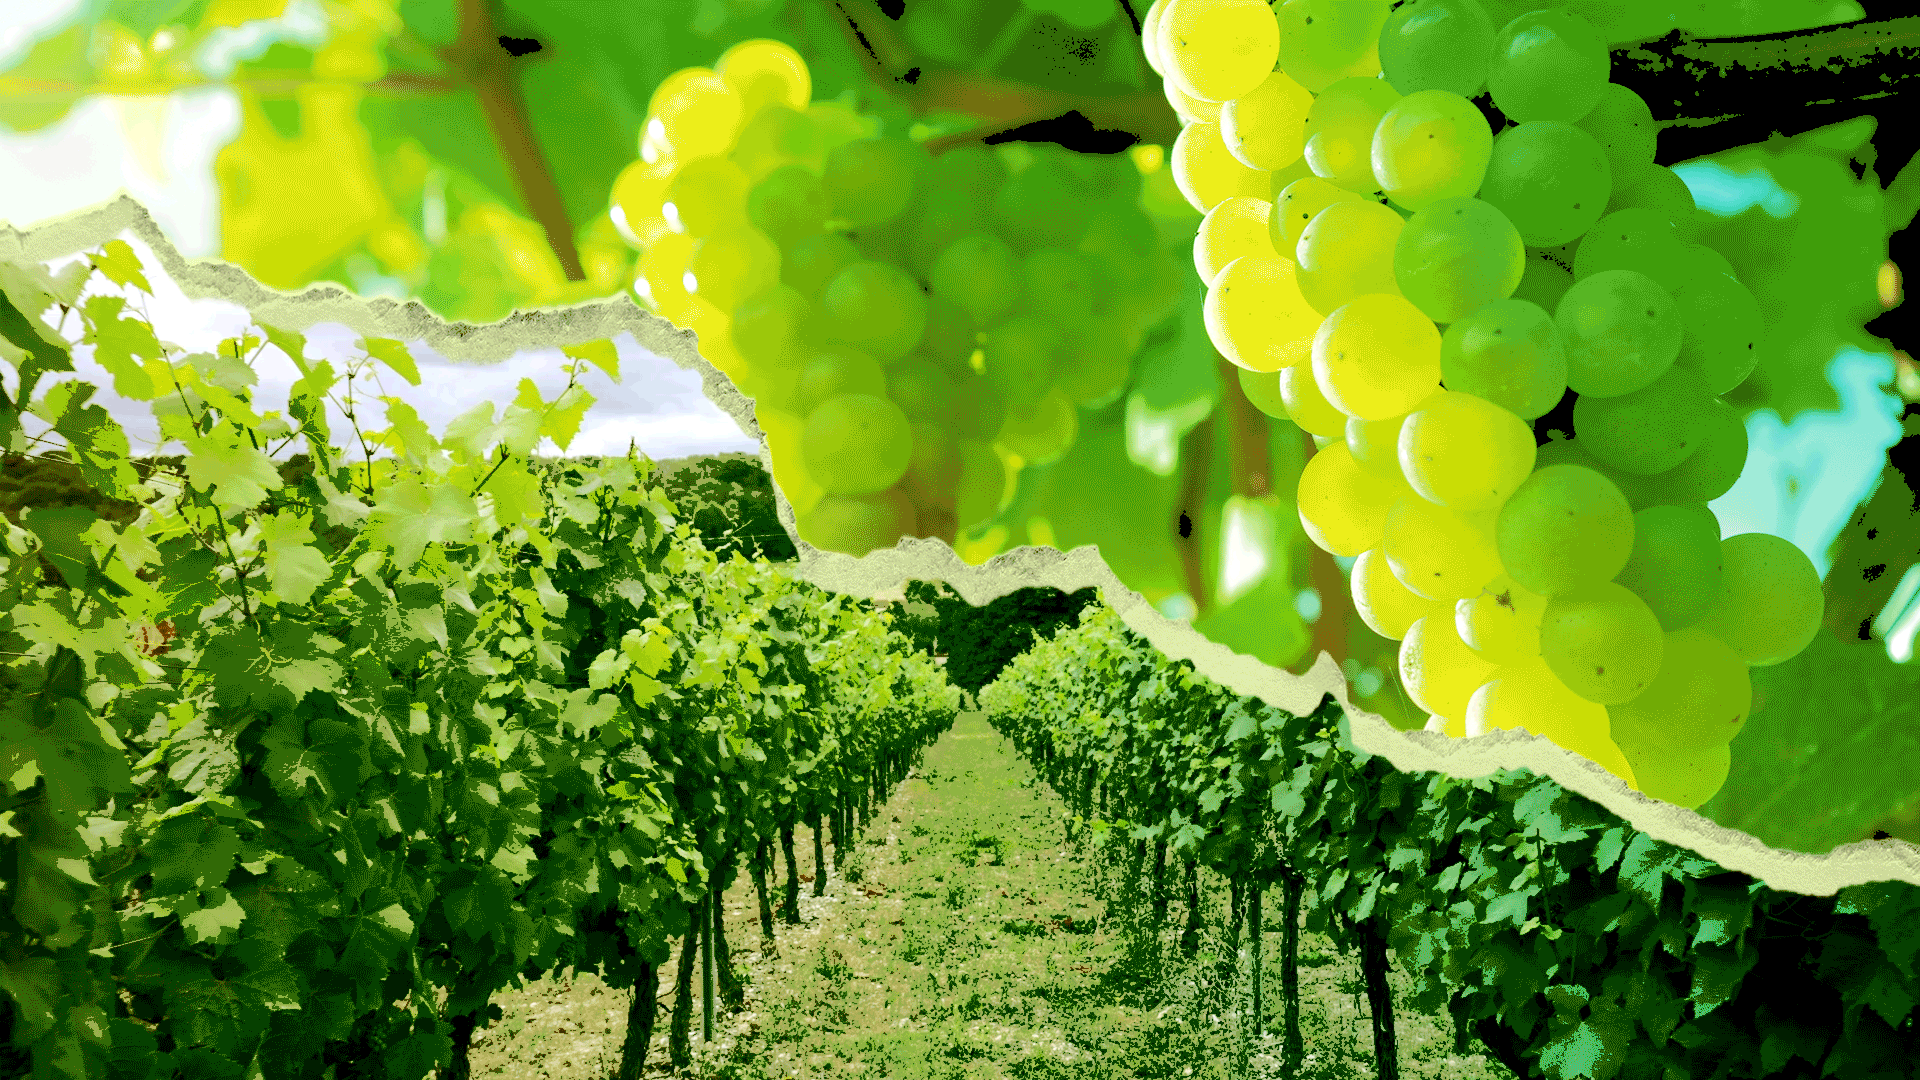 Bottom half of image features the camera going down a row of trees in vineyard, top half is close up of grapes